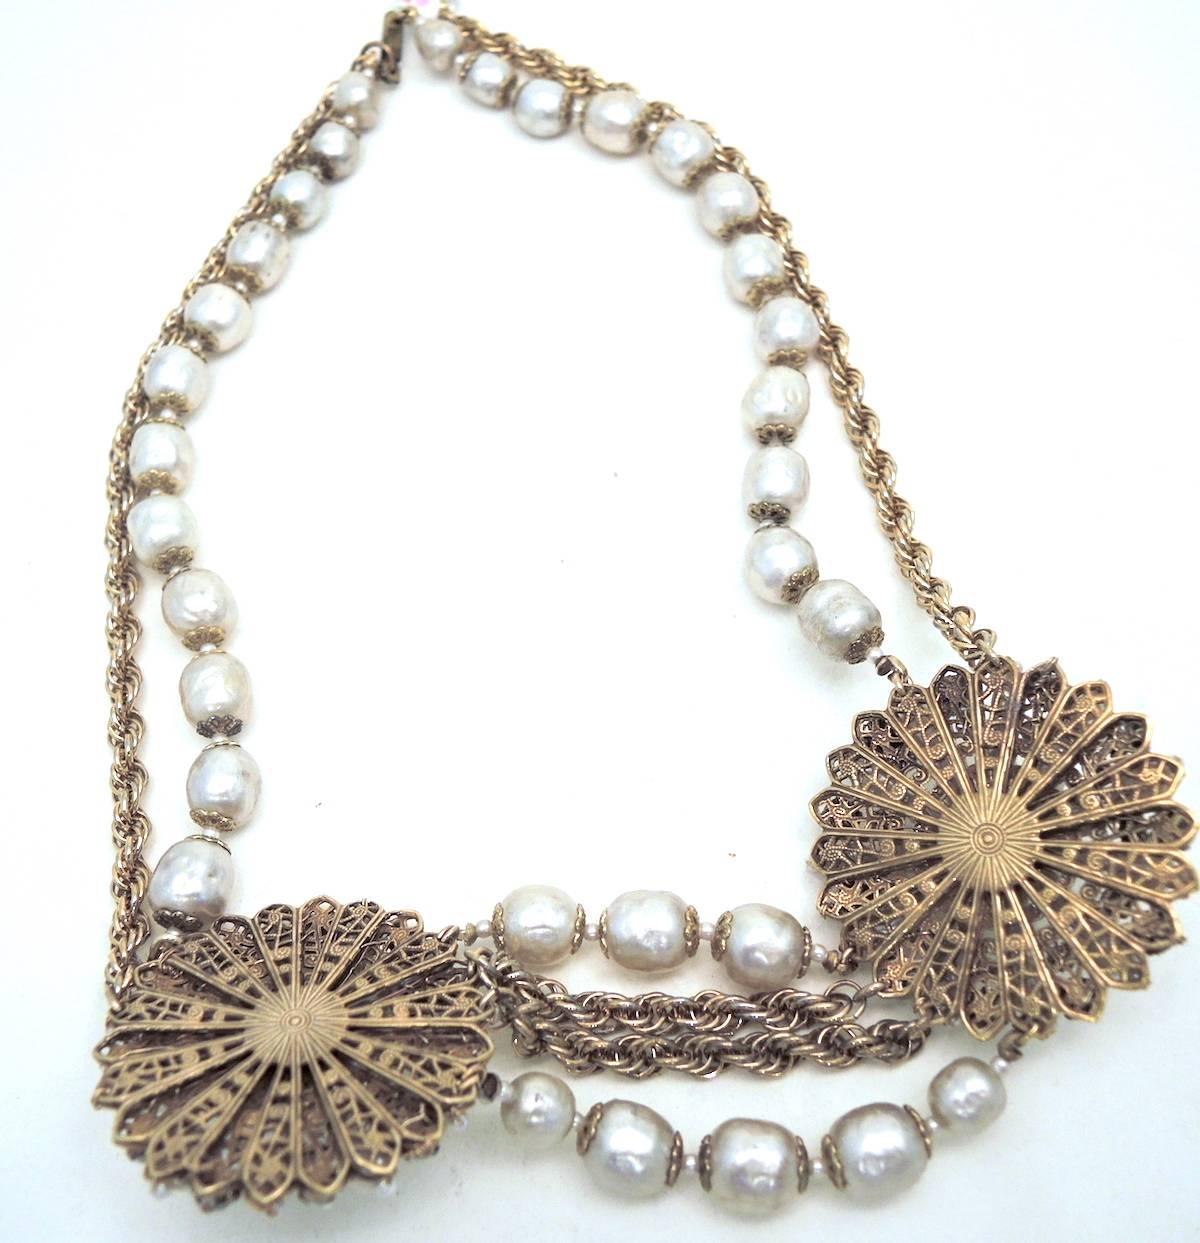 This Miriam Haskell necklace is a beauty!  It features two faux pearl medallions that are decorated with smaller pearls. The center has a 3-dimensional pearl in the center and is covered with rose montee.  The necklace itself has small pearl spacers